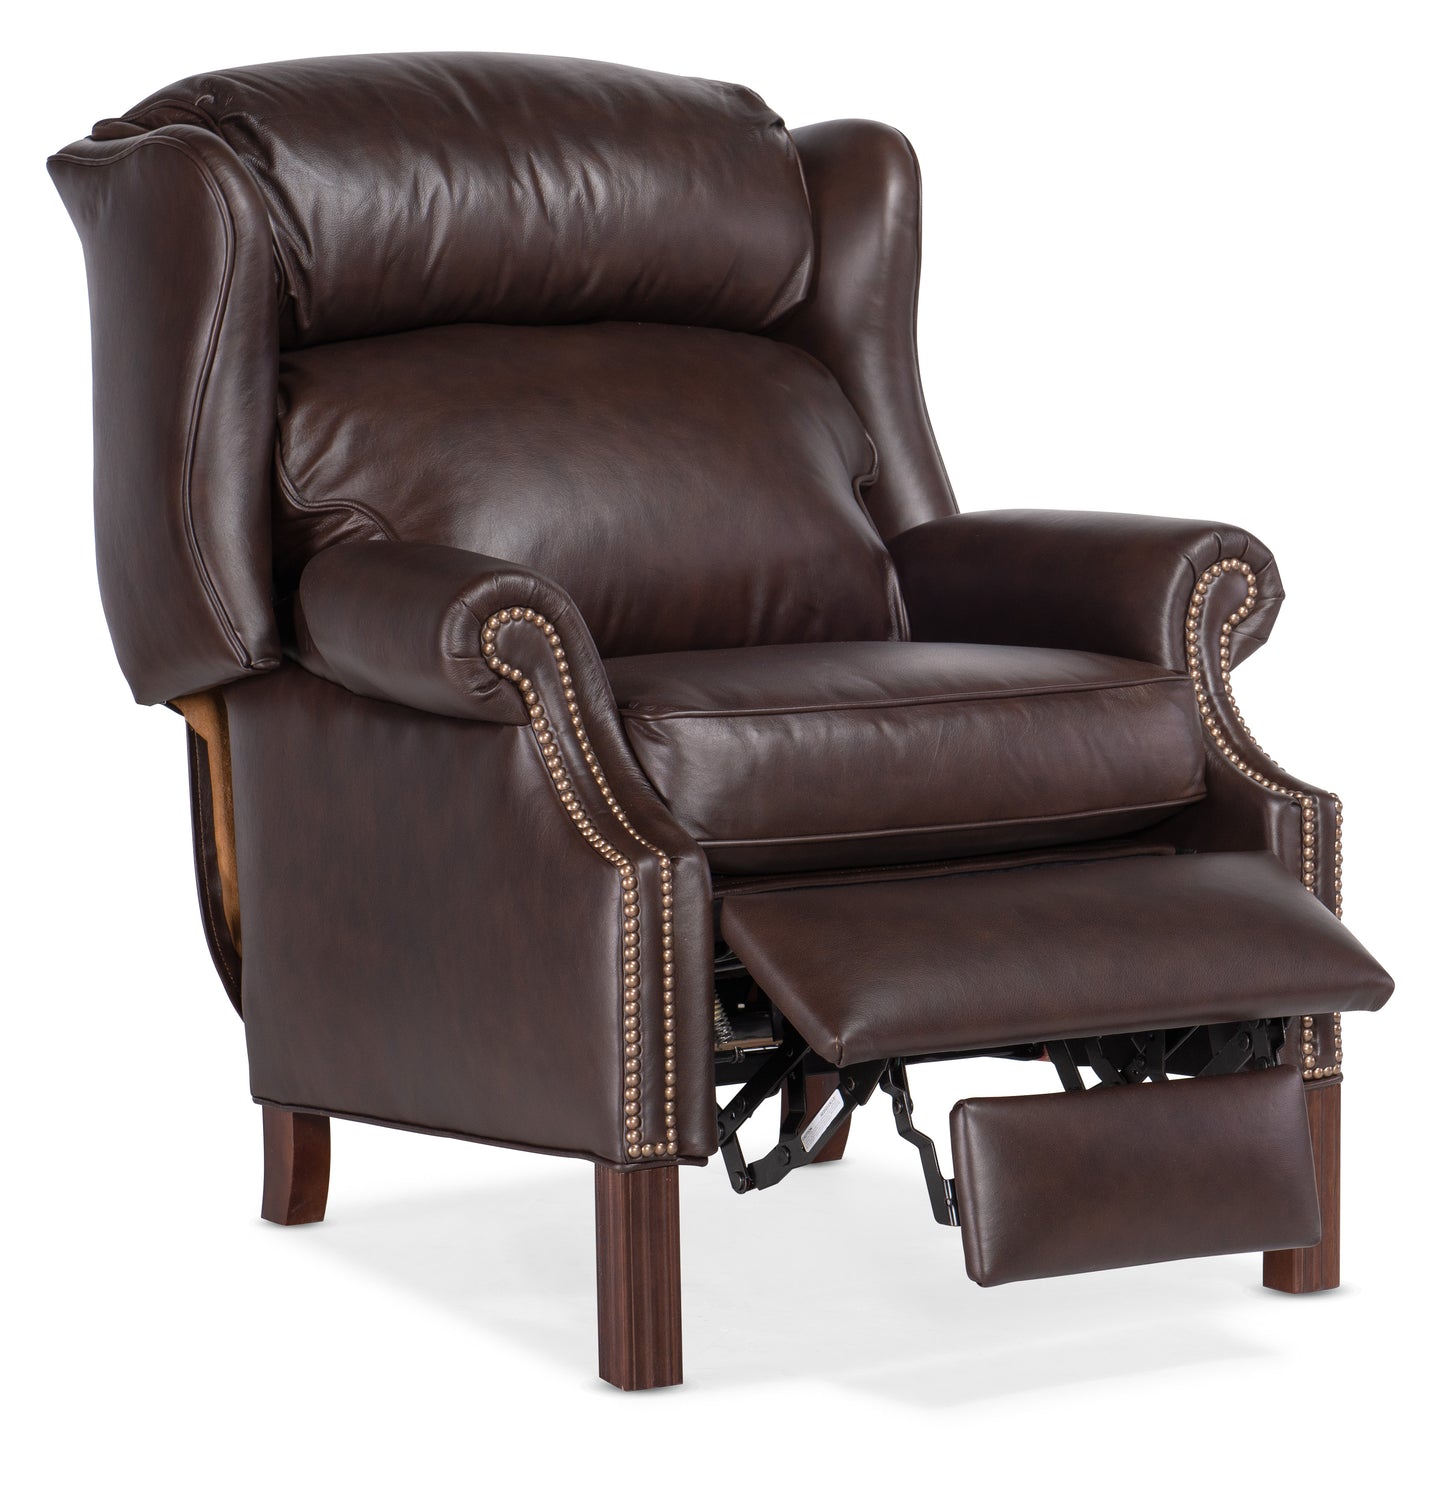 Chippendale Reclining Wing Chair - Stickley Furniture | Mattress